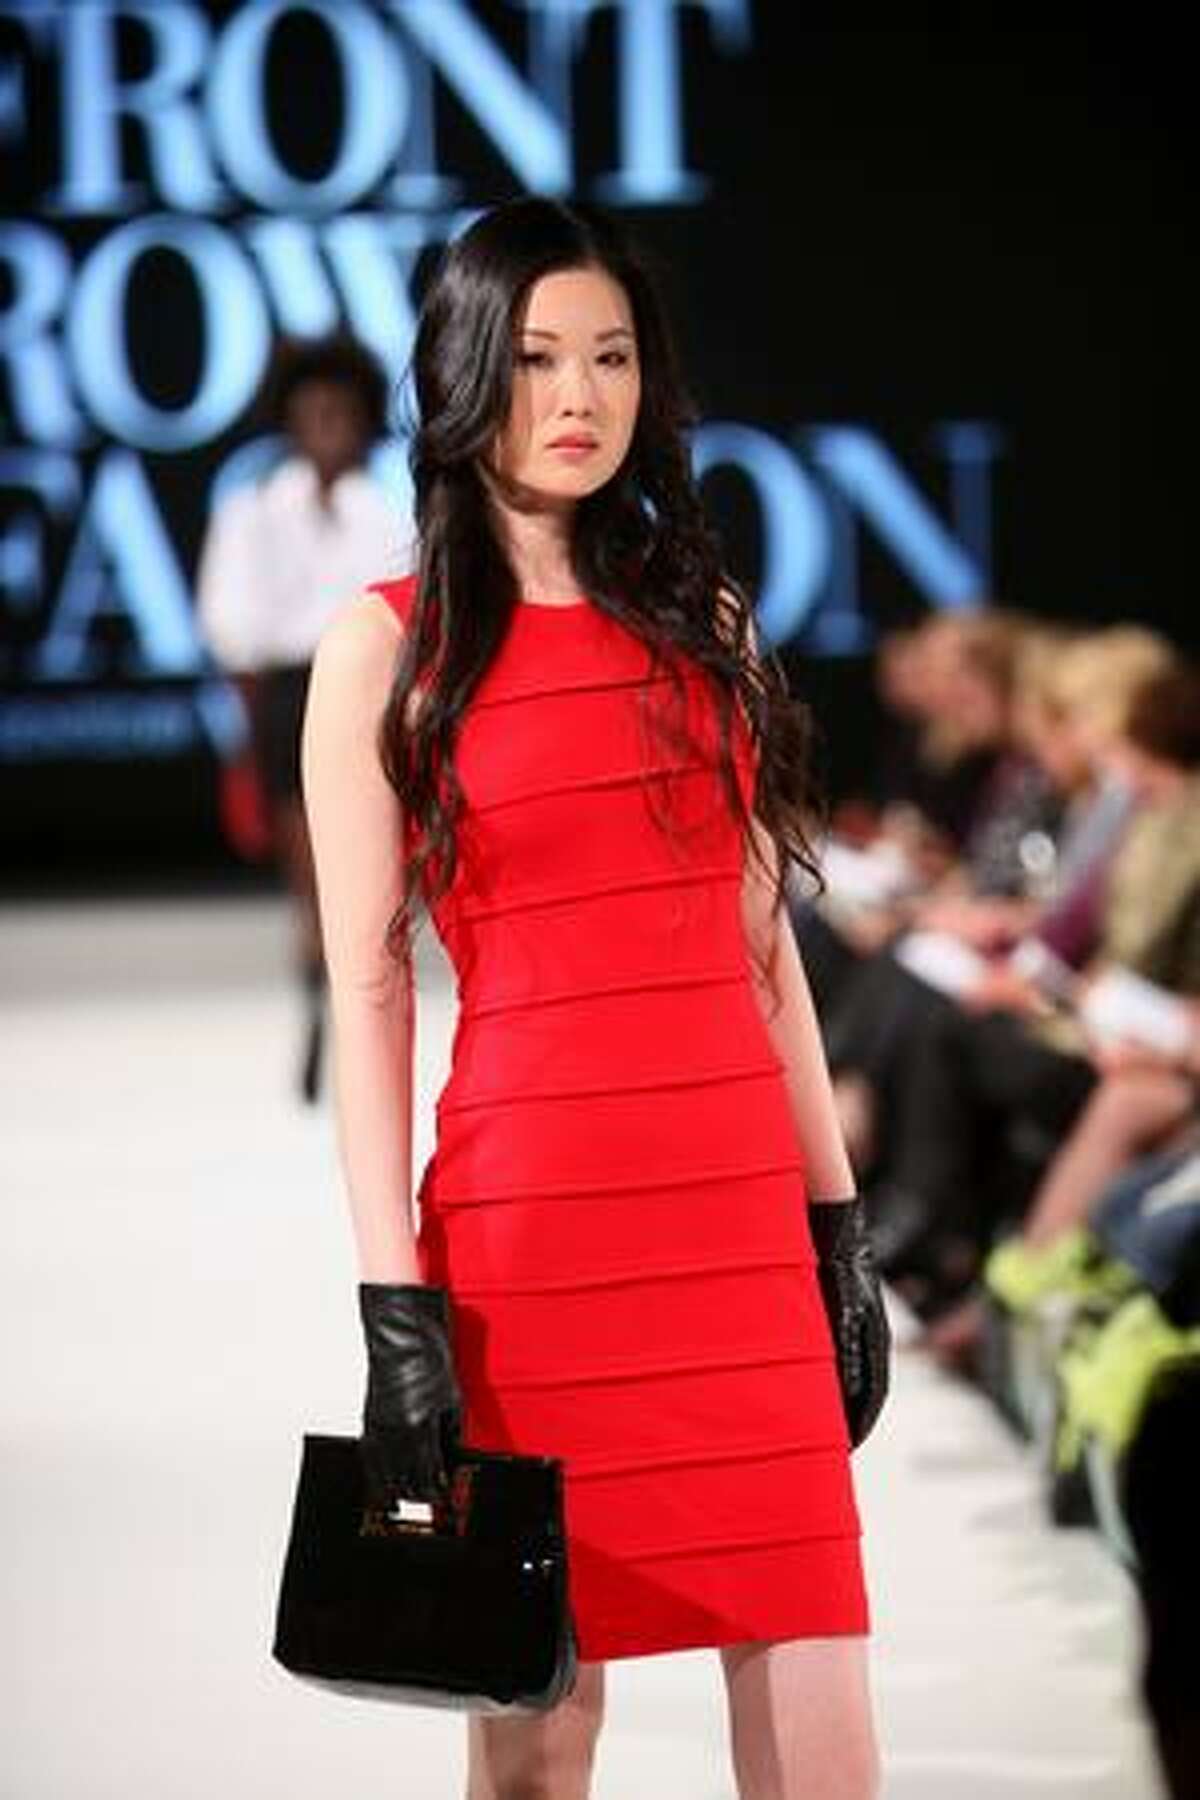 A model walks the runway during Vogue's Front Row Fashion show at the Hyatt Regency Bellevue.